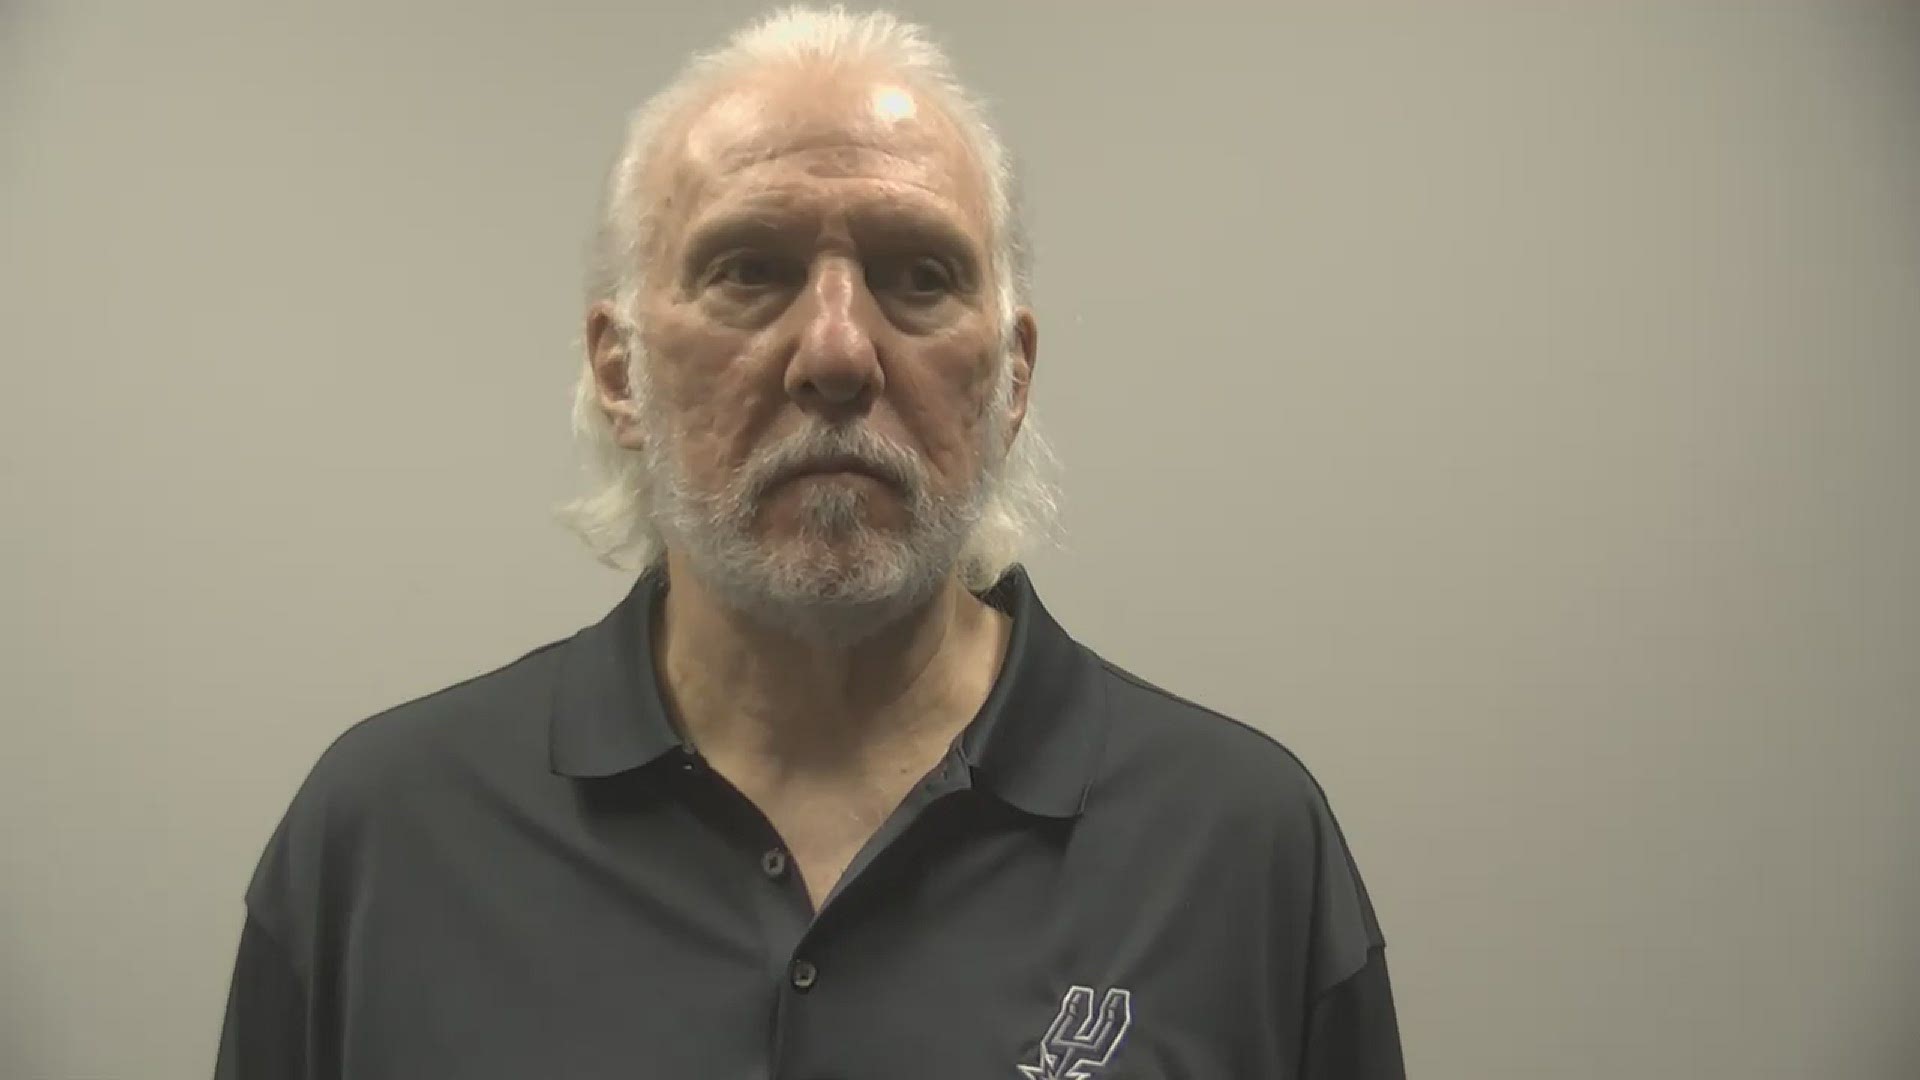 Popovich pointed to defense in the second and fourth quarters as pivotal to San Antonio's win, and said the battle was important for developing the young guys.